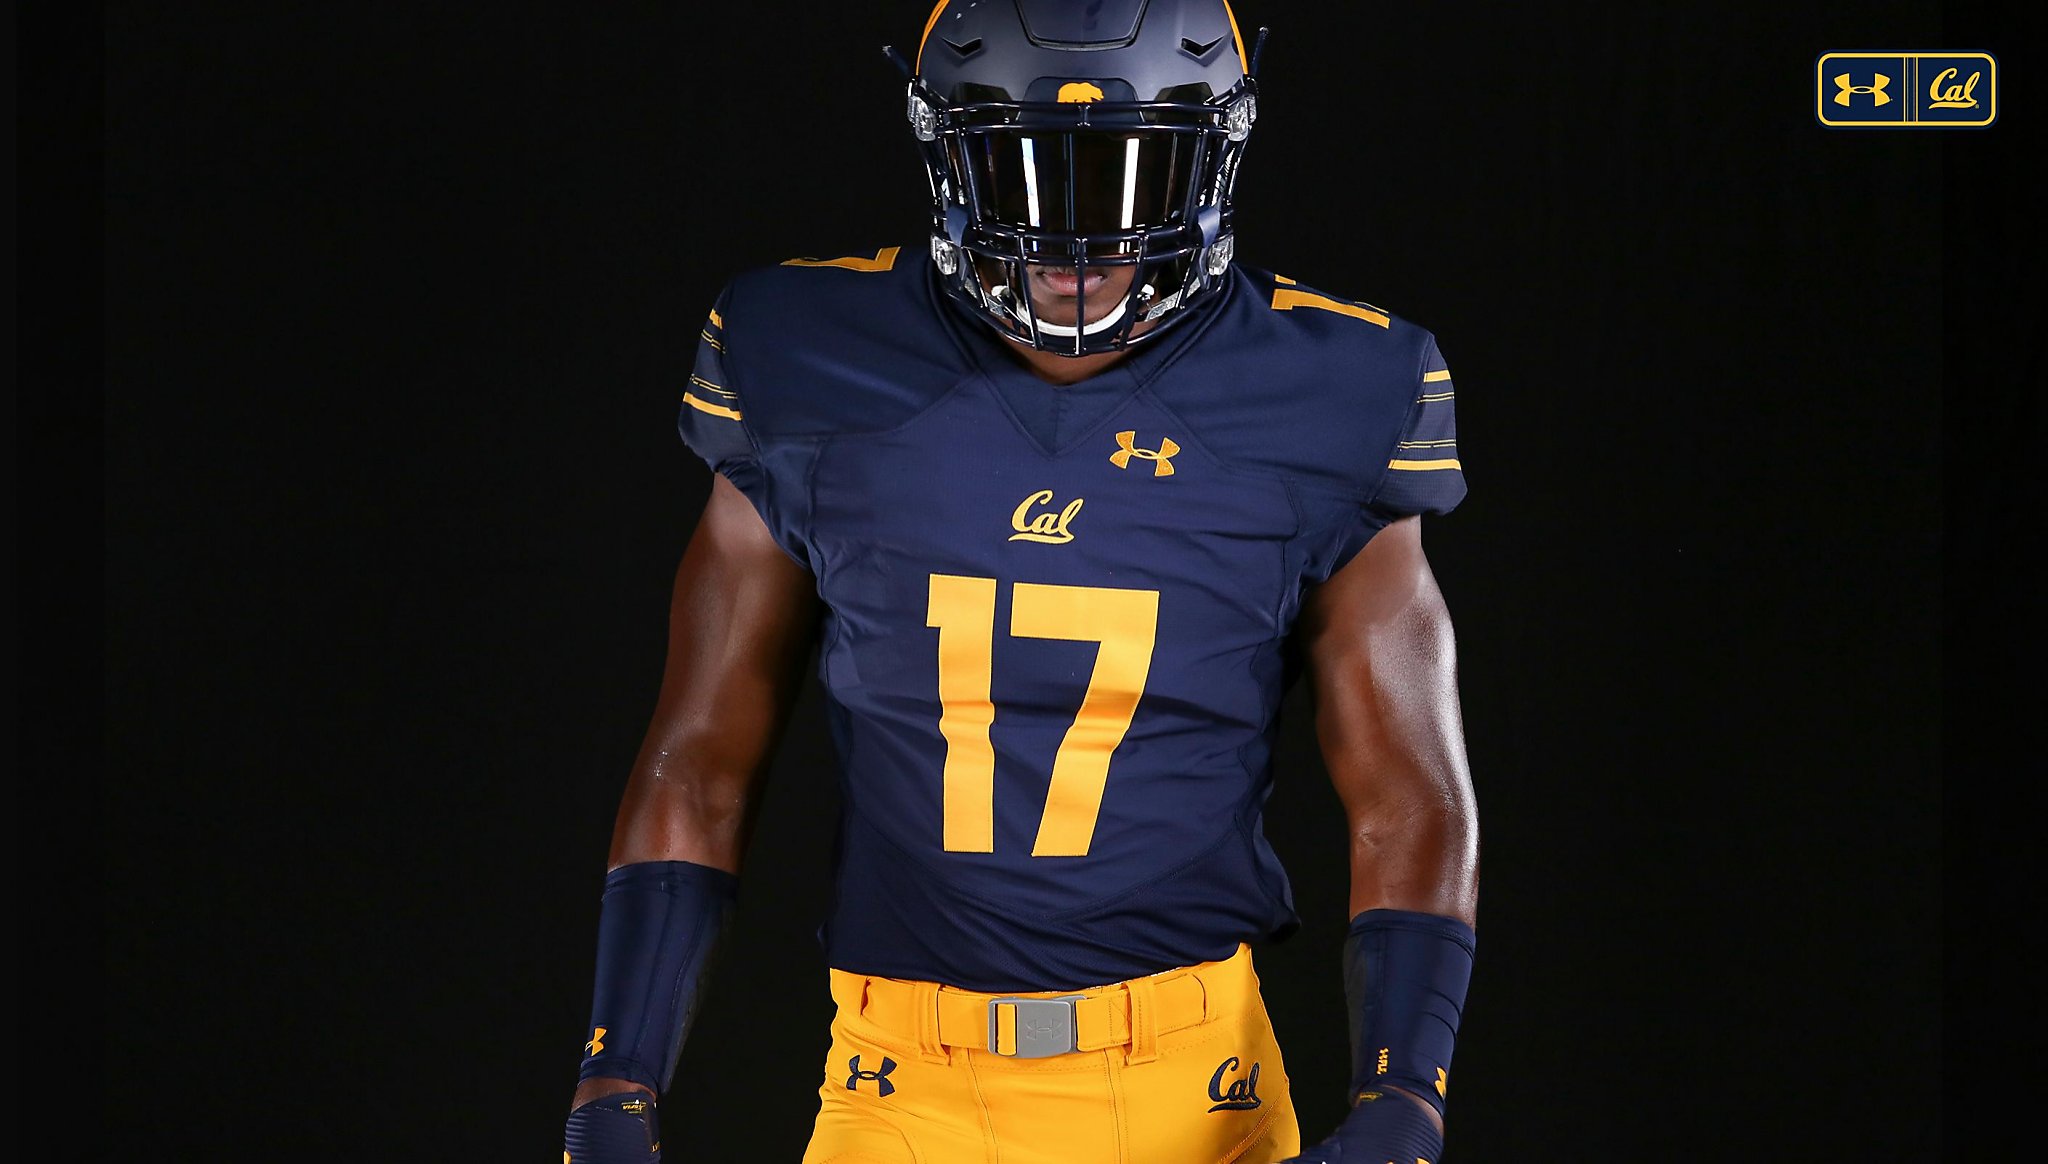 Cal, Under Armour release new home uniforms